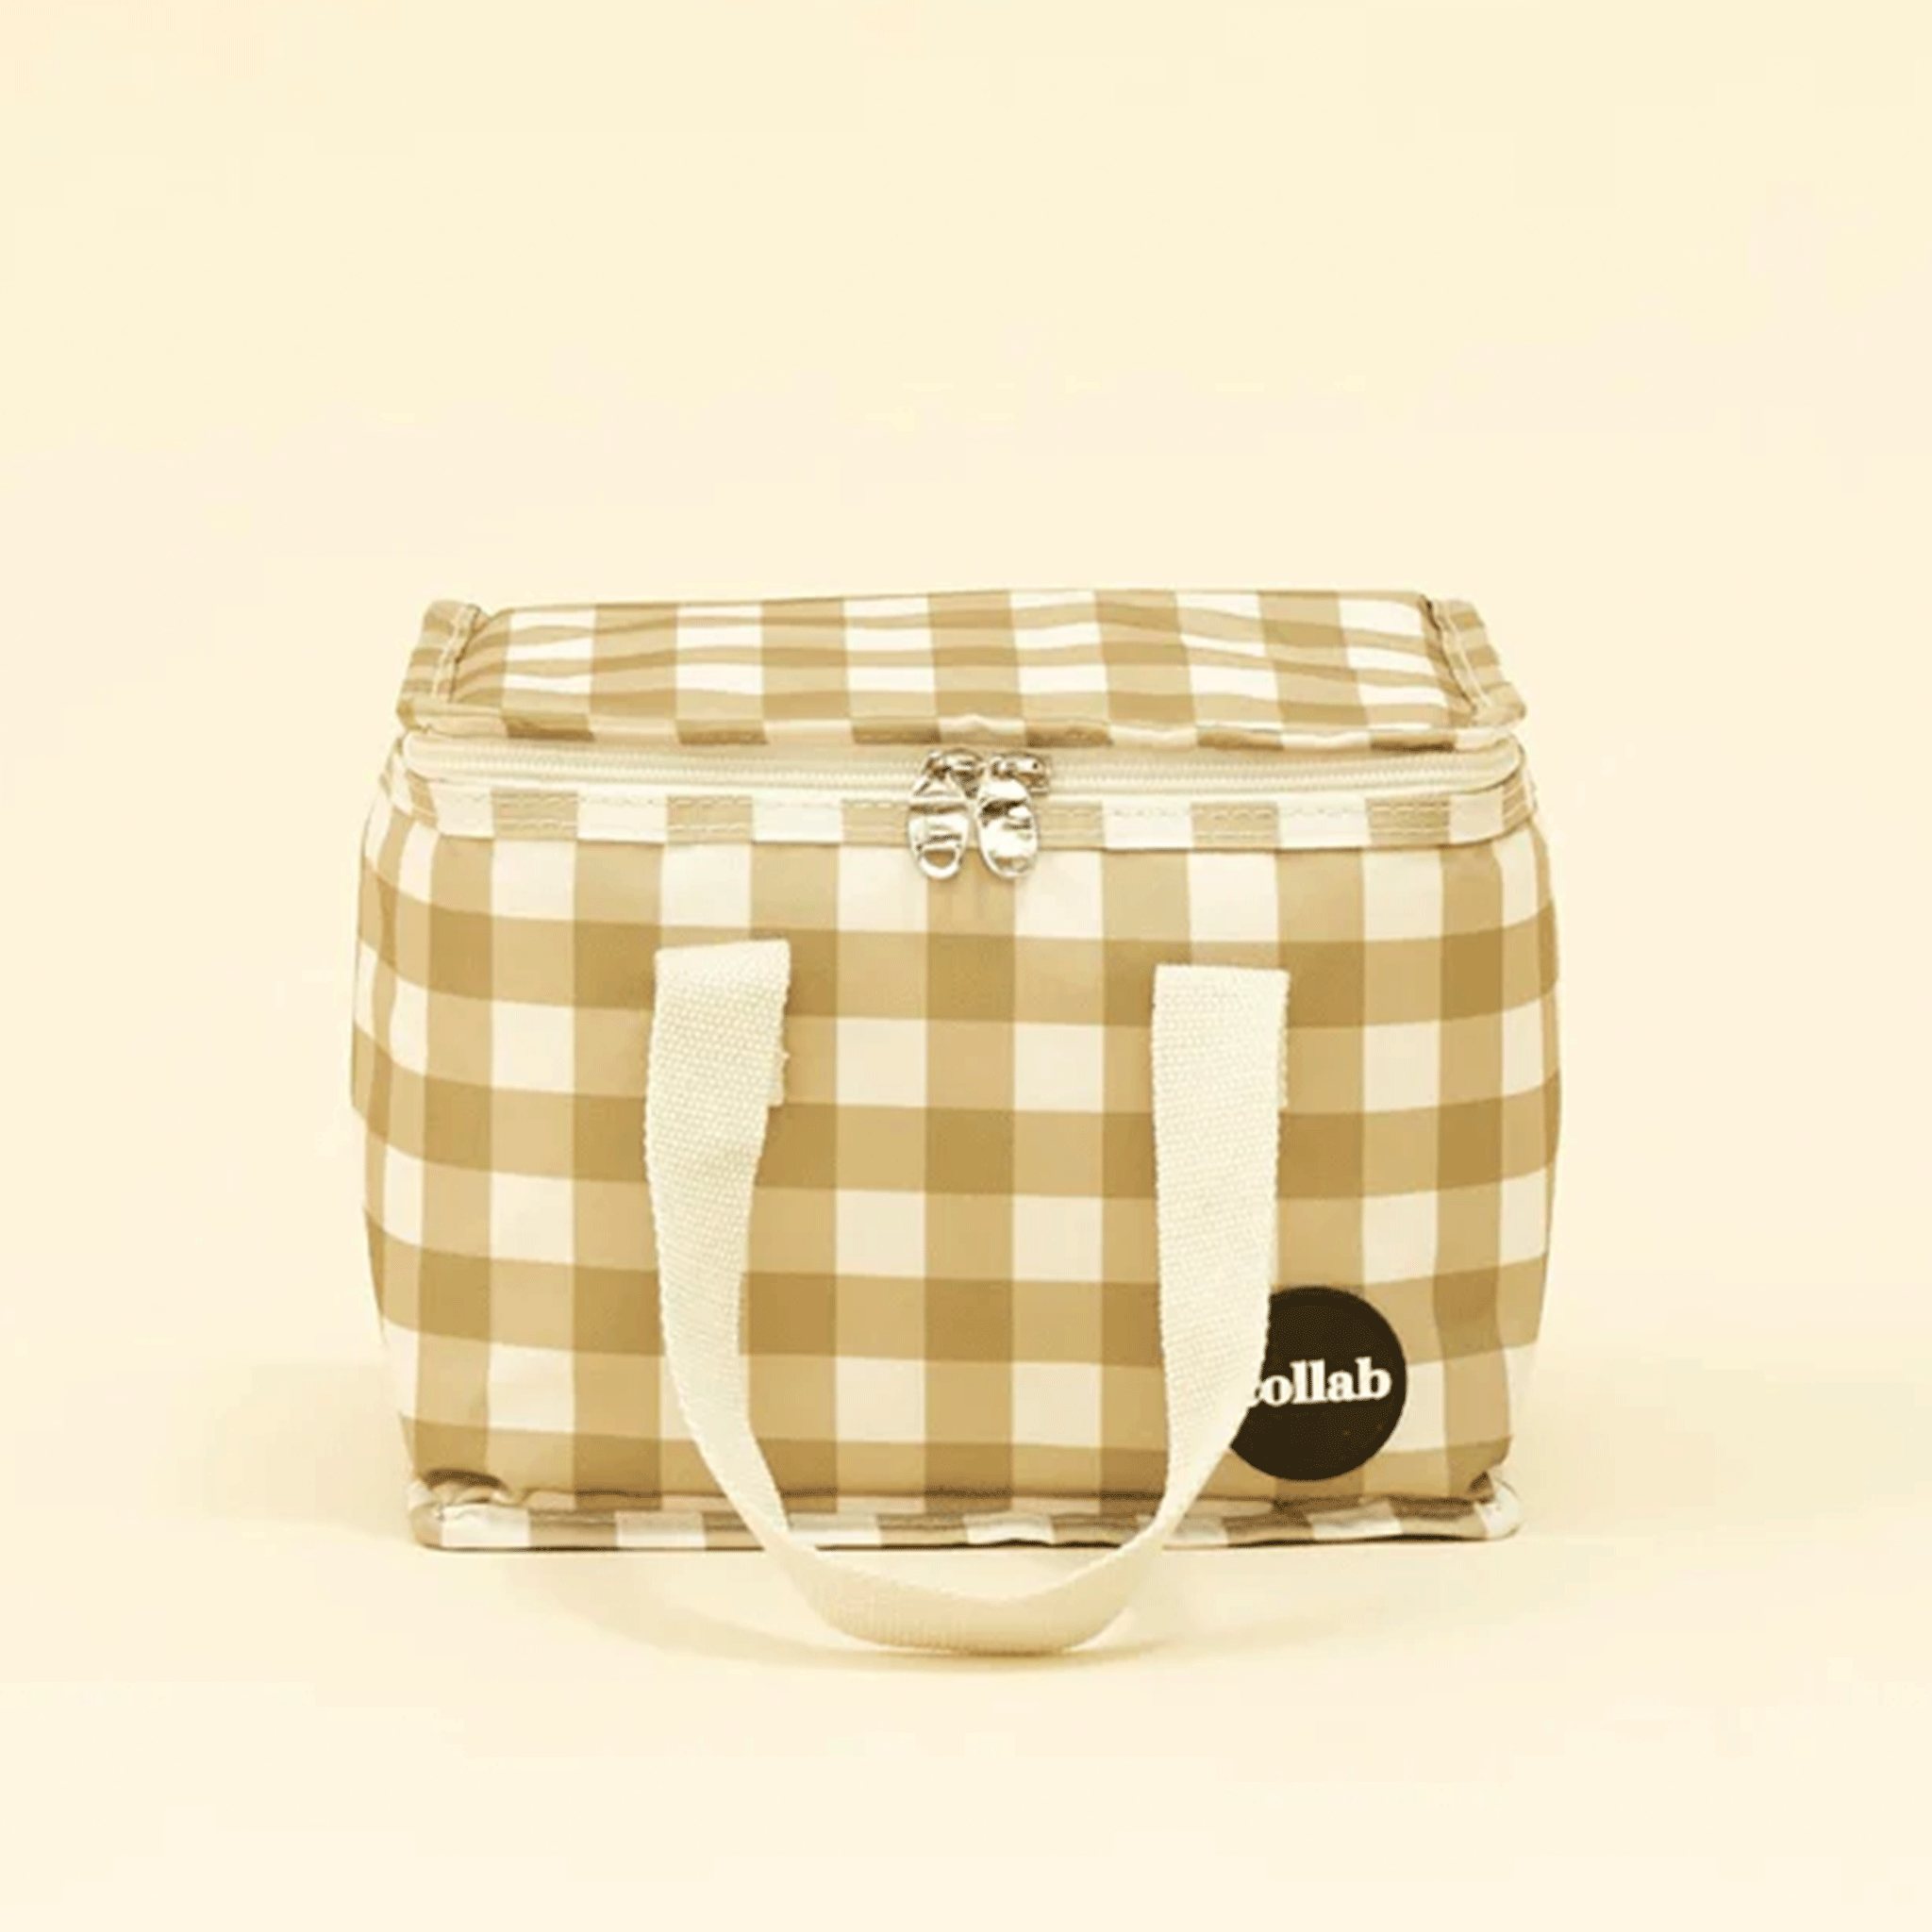 On a light yellow background is an ivory and green checkered lunch box.